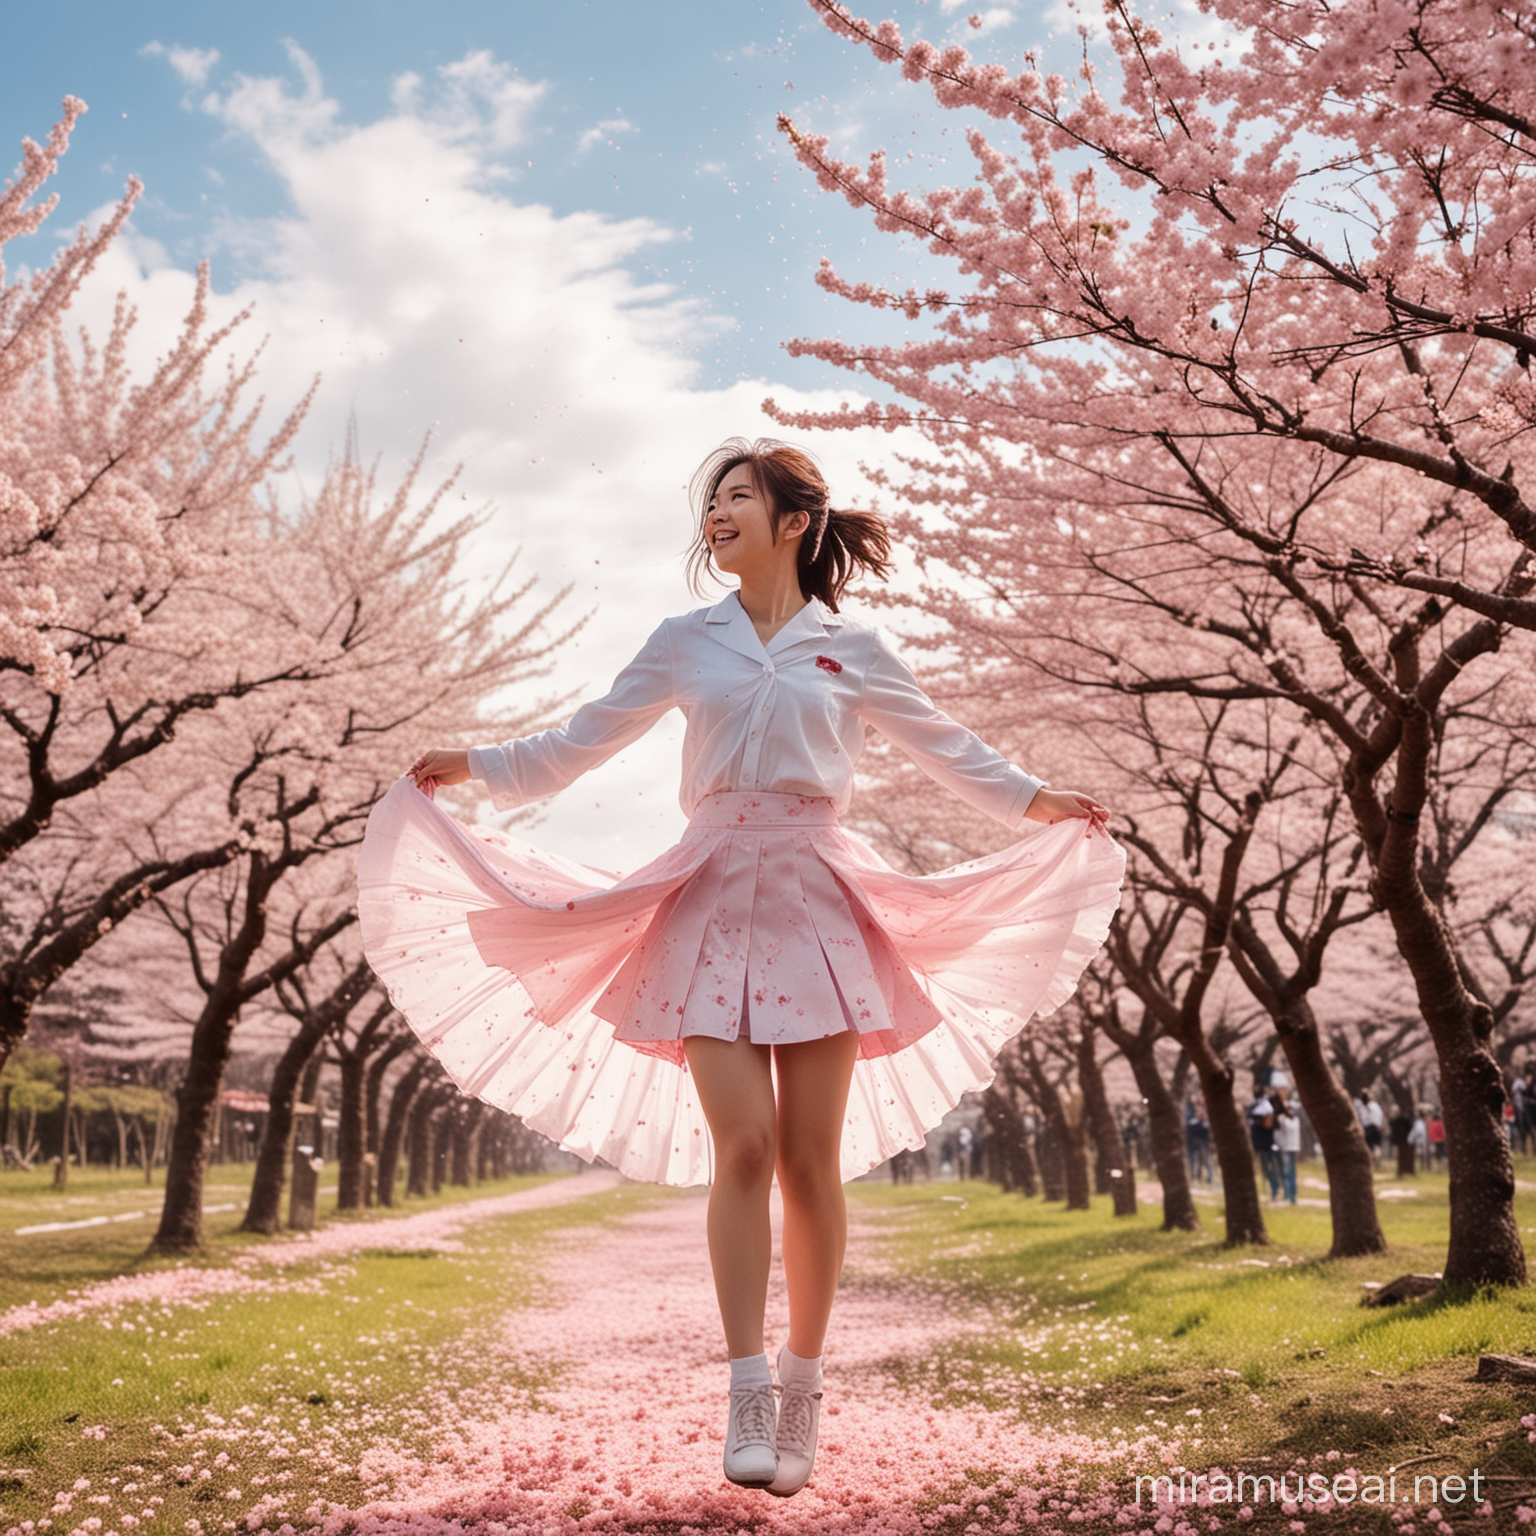 Japanese High School Girl Flying Among Cherry Blossoms with Pink Powder